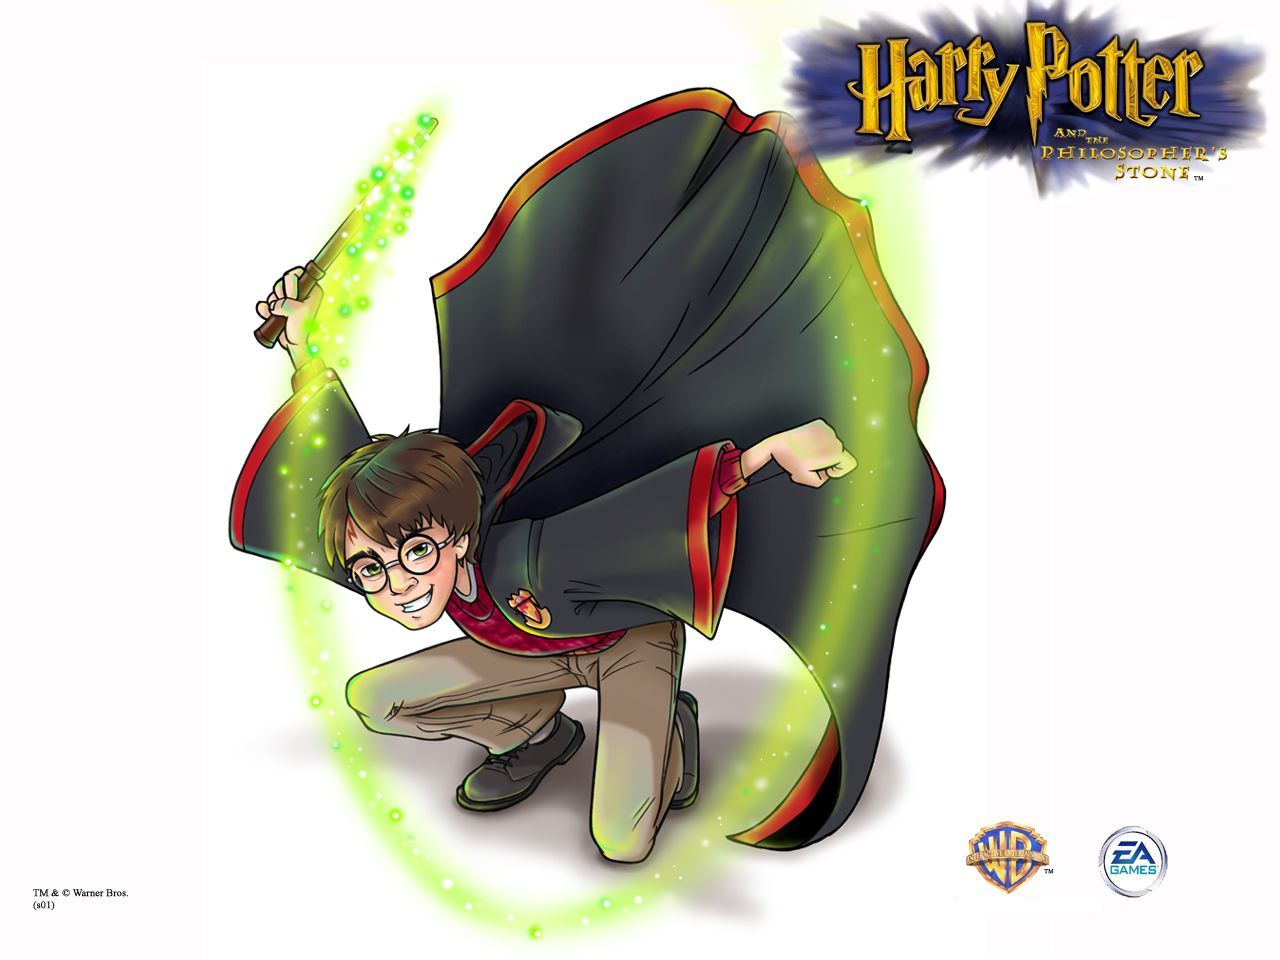 Harry Potter and the Sorcerer's Stone (2001) promotional art